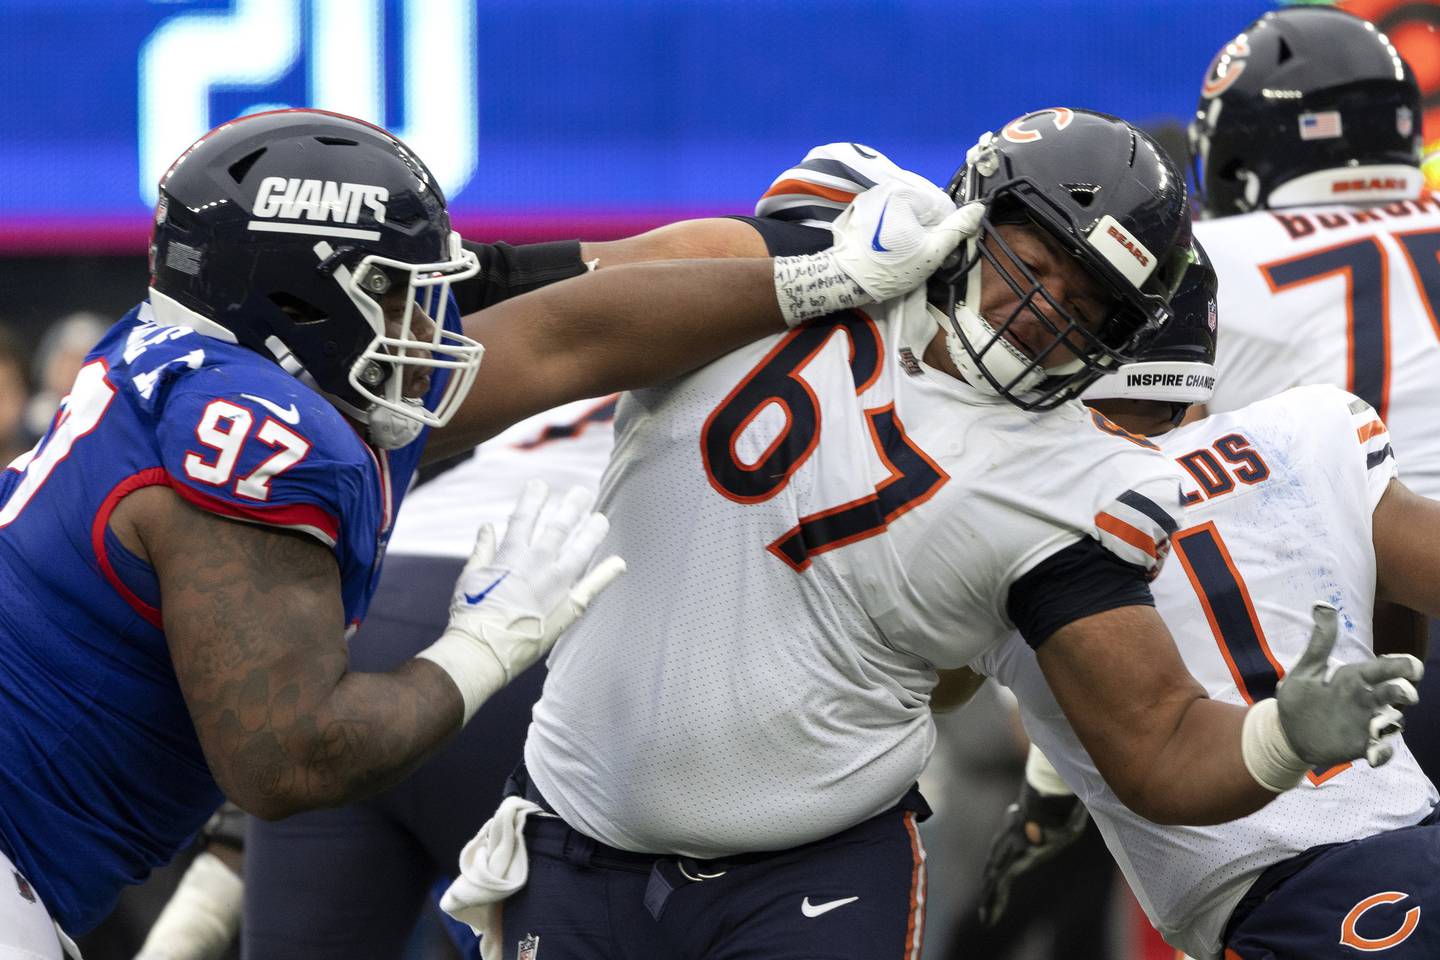 Giants defensive tackle Dexter Lawrence grabs the jersey of Bears center Sam Mustipher during the fourth quarter of the game on Oct. 12, 2022.